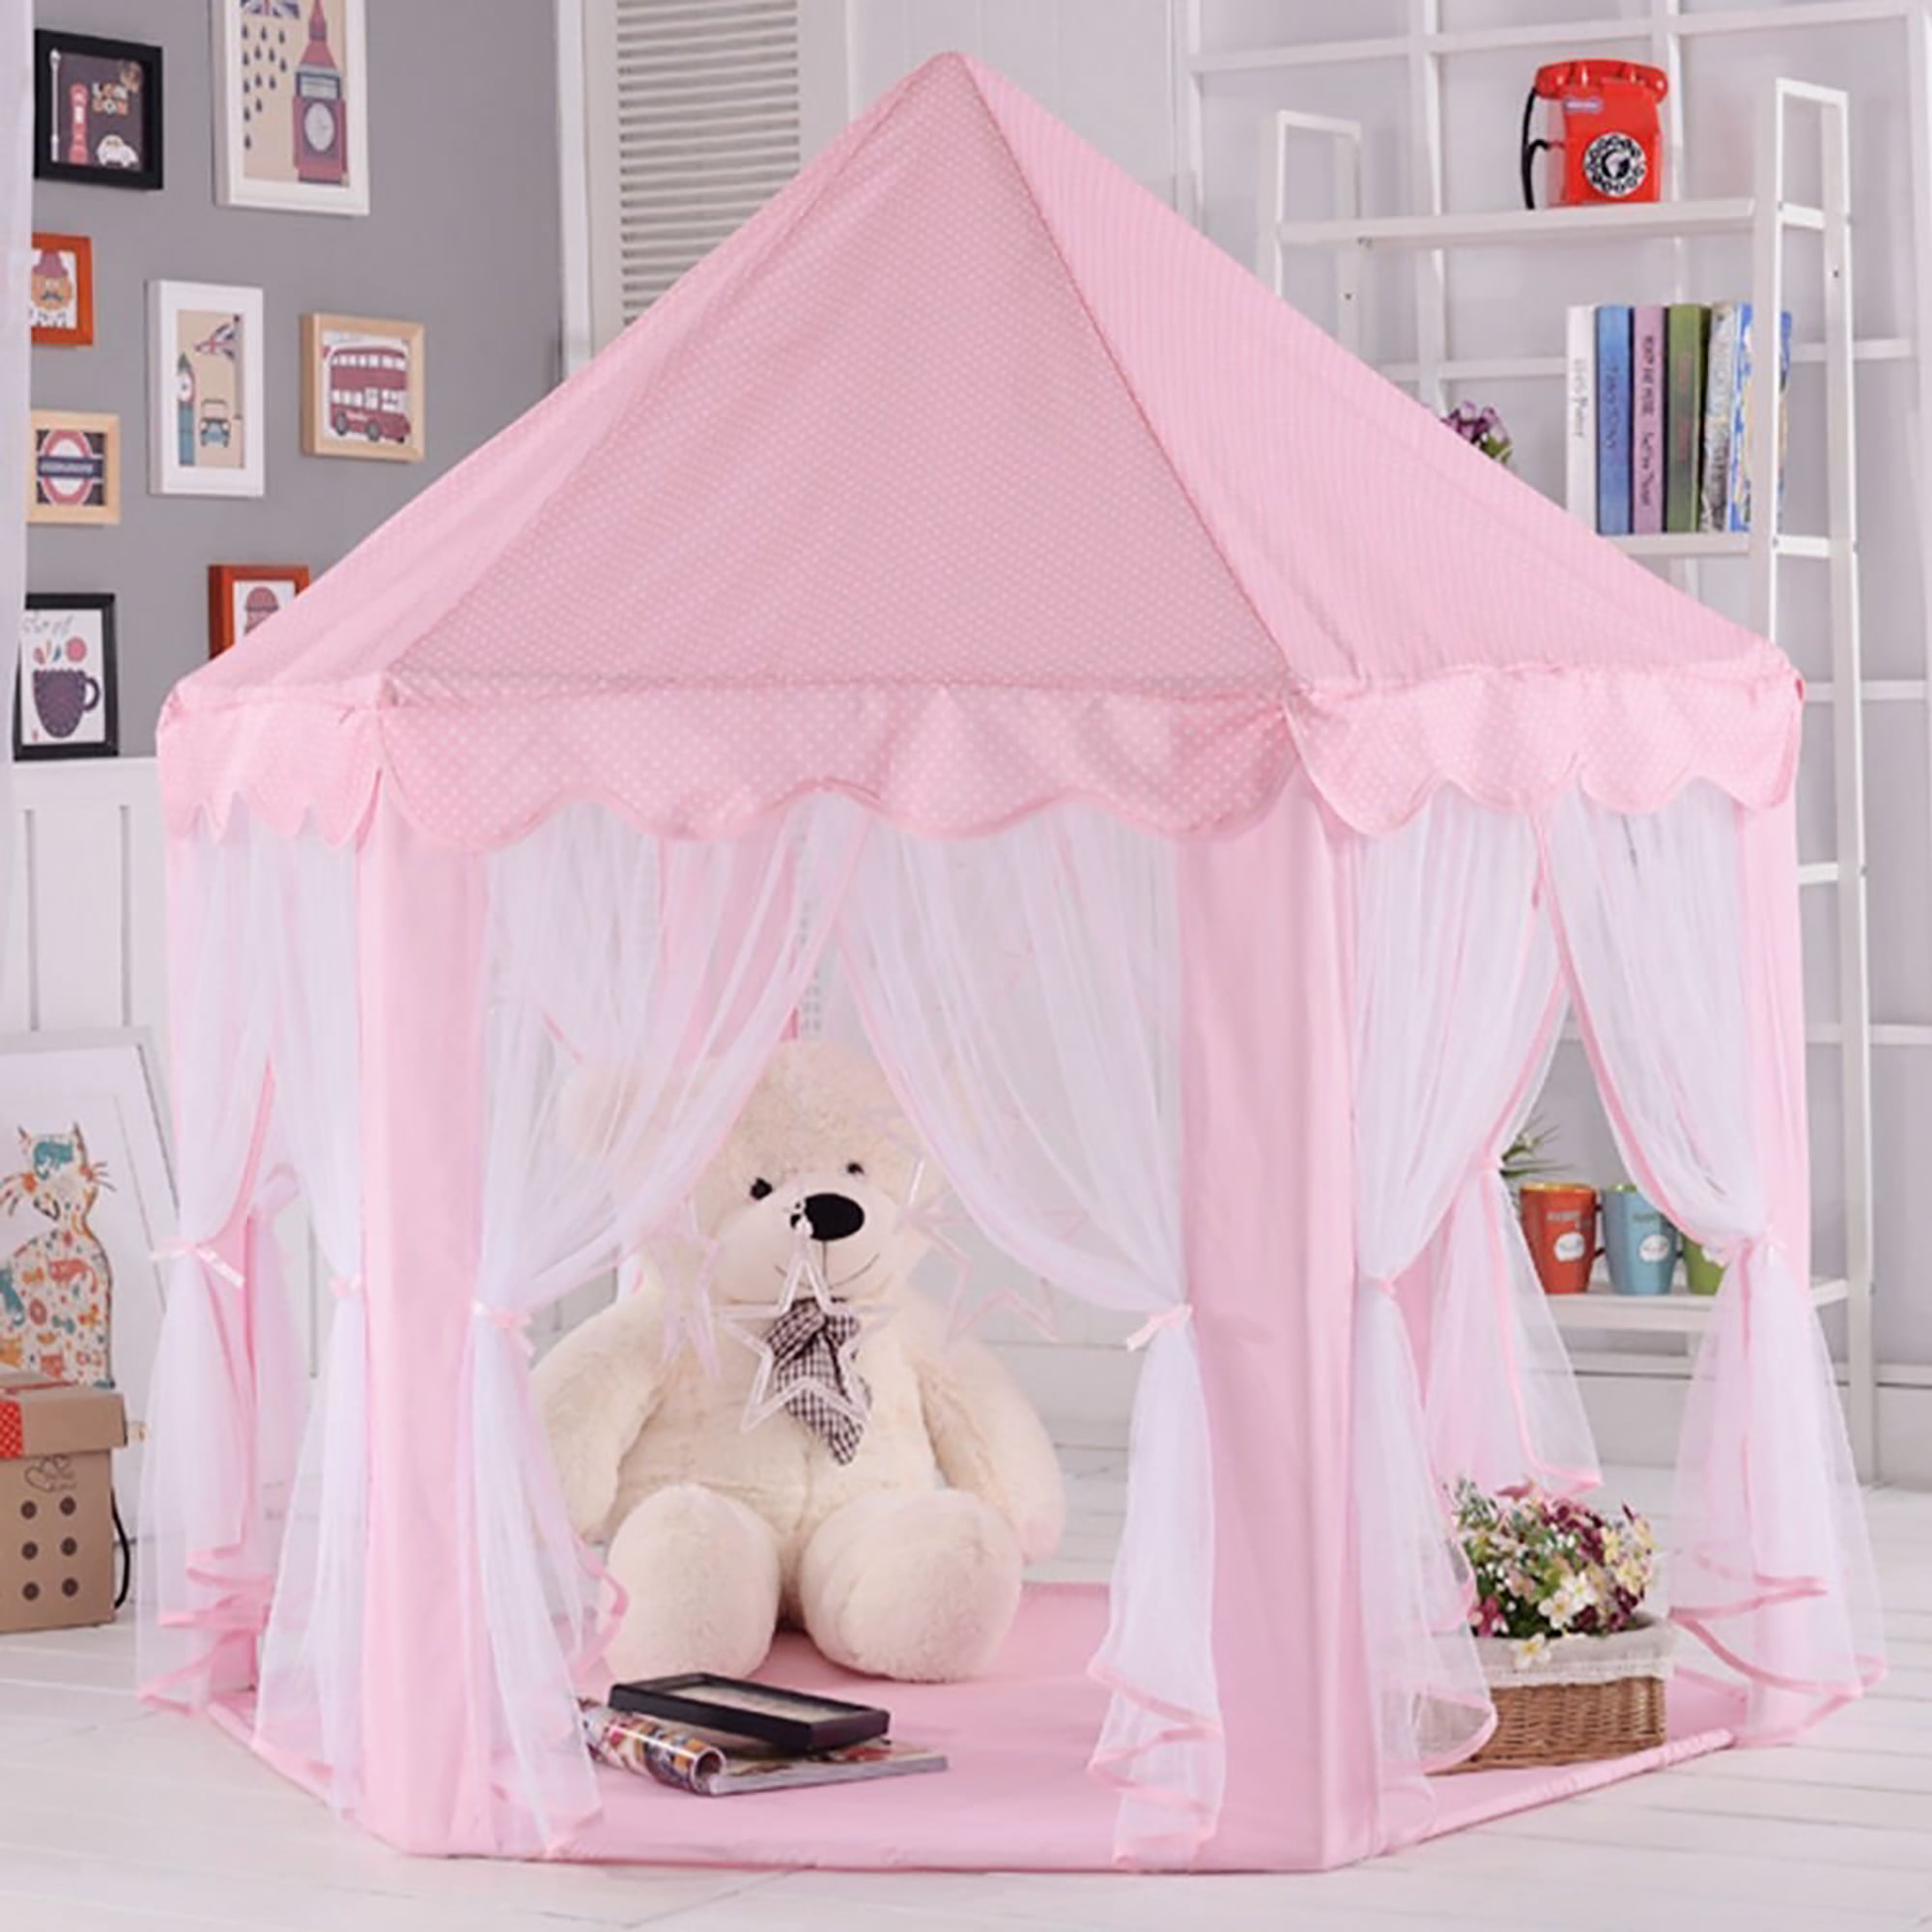 Girls Princess Pink Play Tent House Child Toys Outdoor/Indoor Kid Castle 